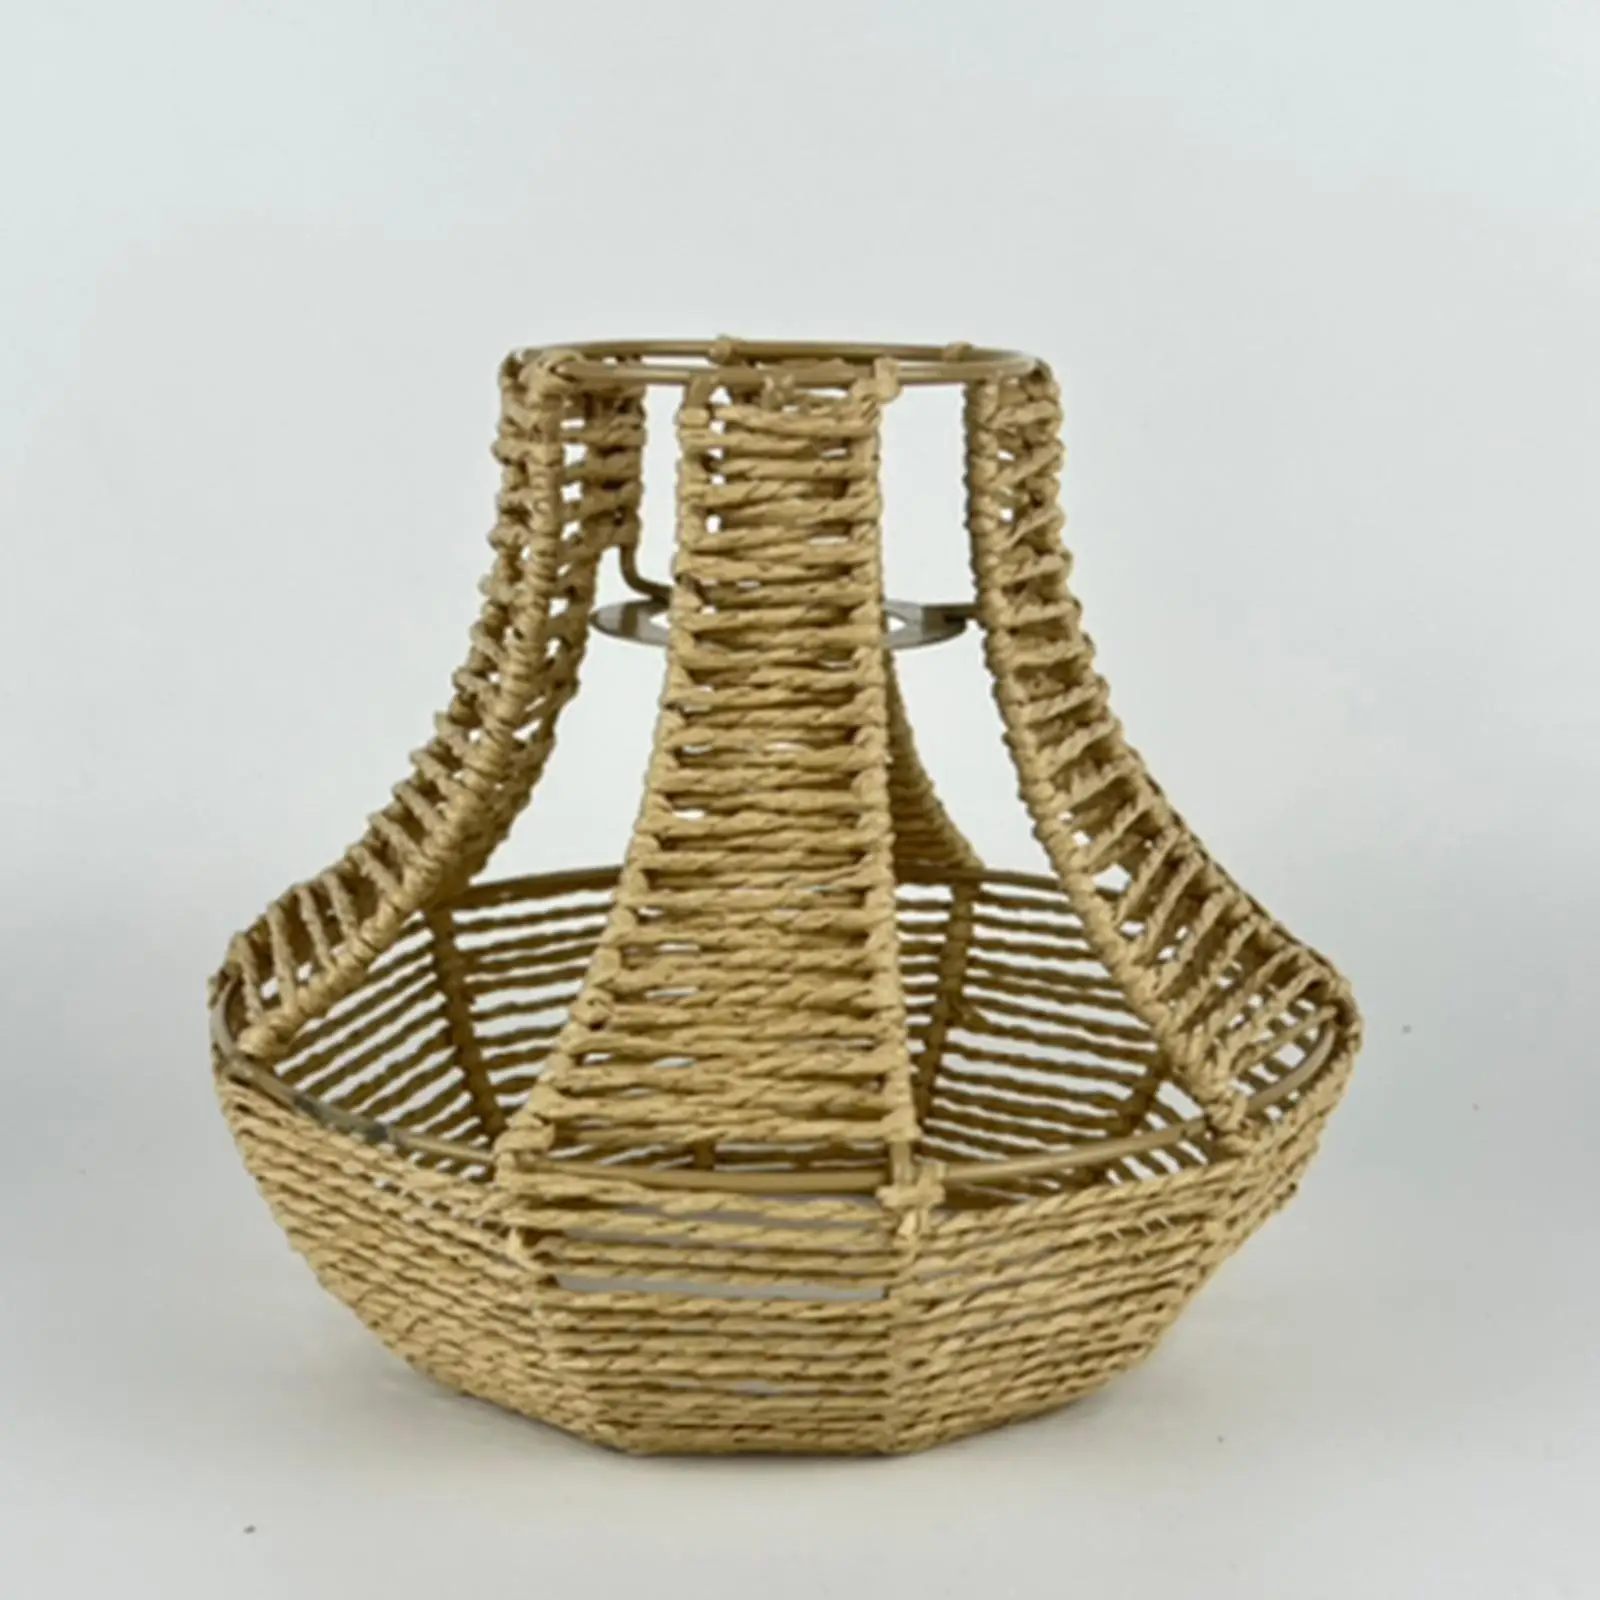 Woven Pendant Lamp Shade Rope Rattan Chandelier Cover, Accessories Durable Elegant Look